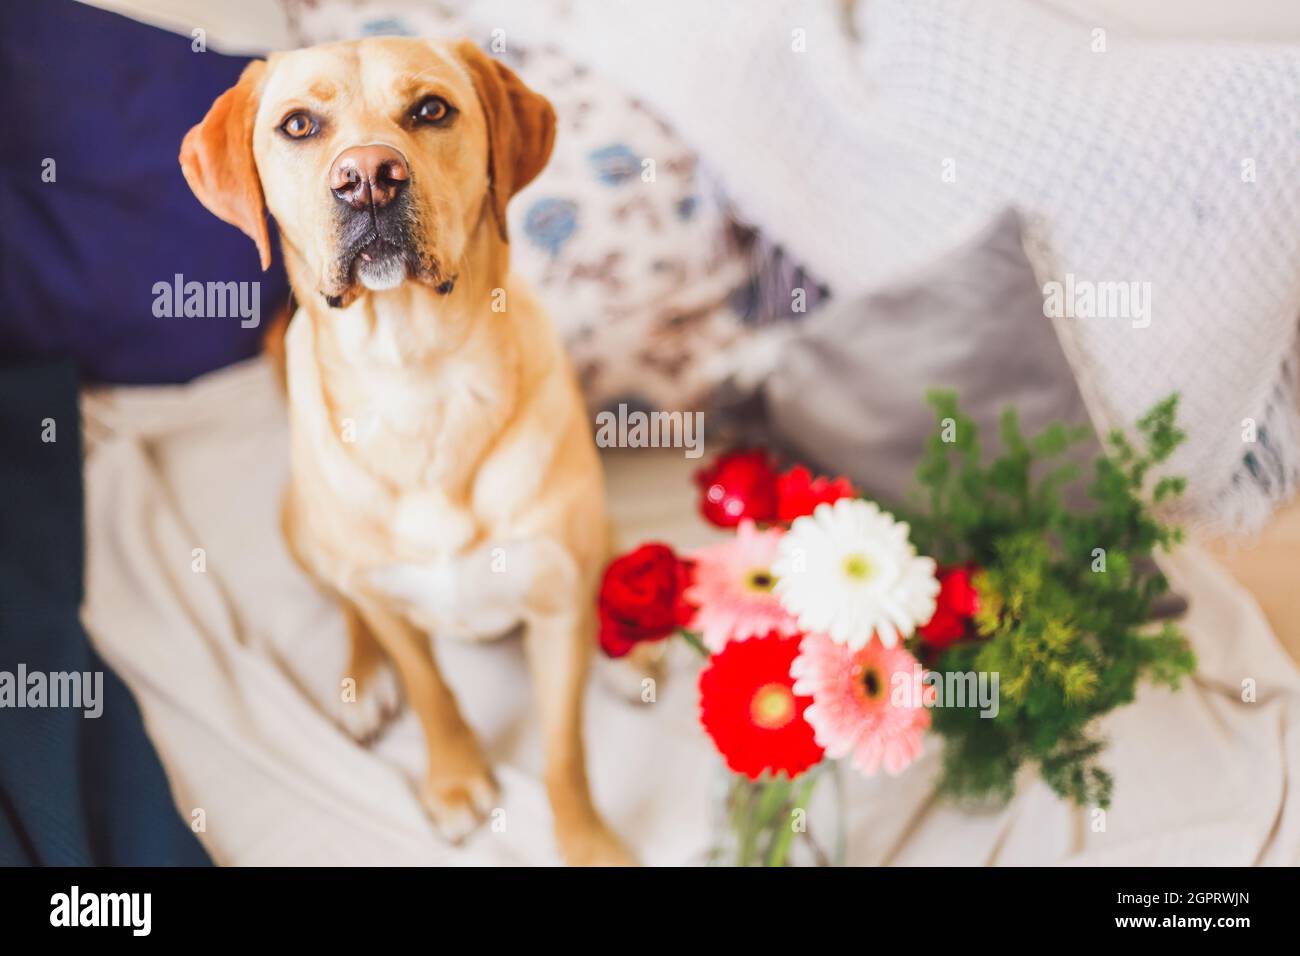 Labrador Dog With Flowers And Decorations Looking Up. Cute Pets Concept. Stock Photo